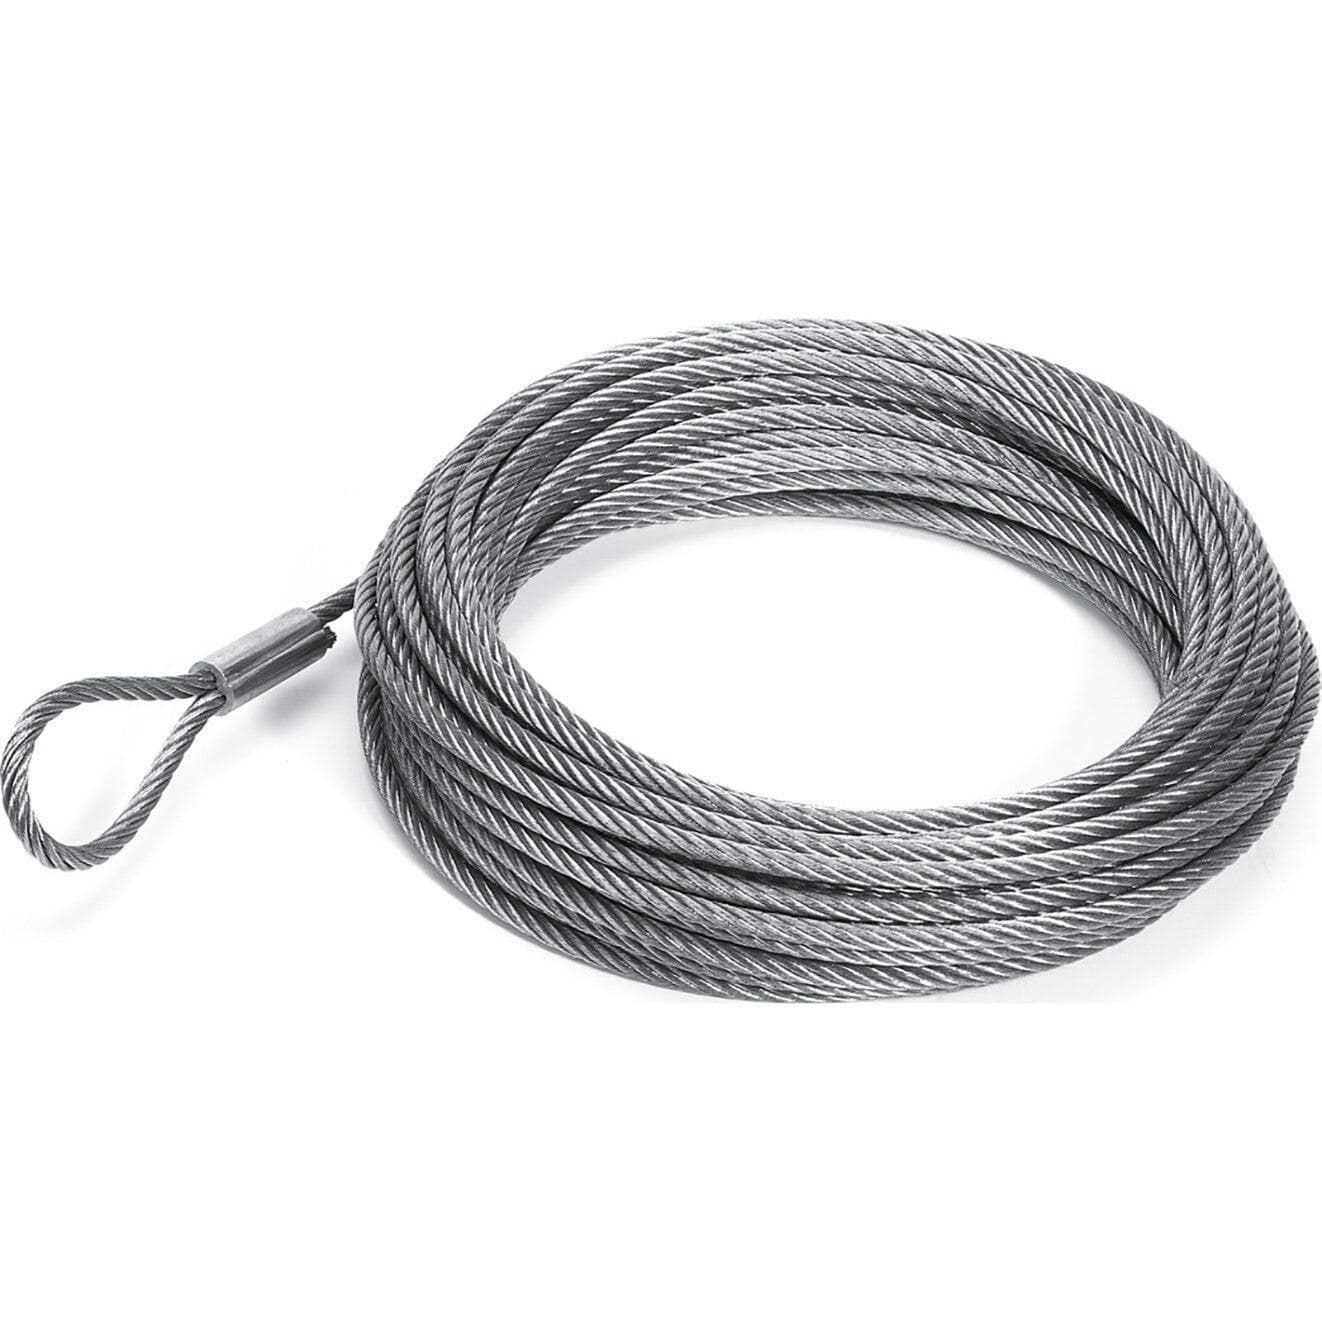 Wire Rope Replacement - 55’ of 1/4”